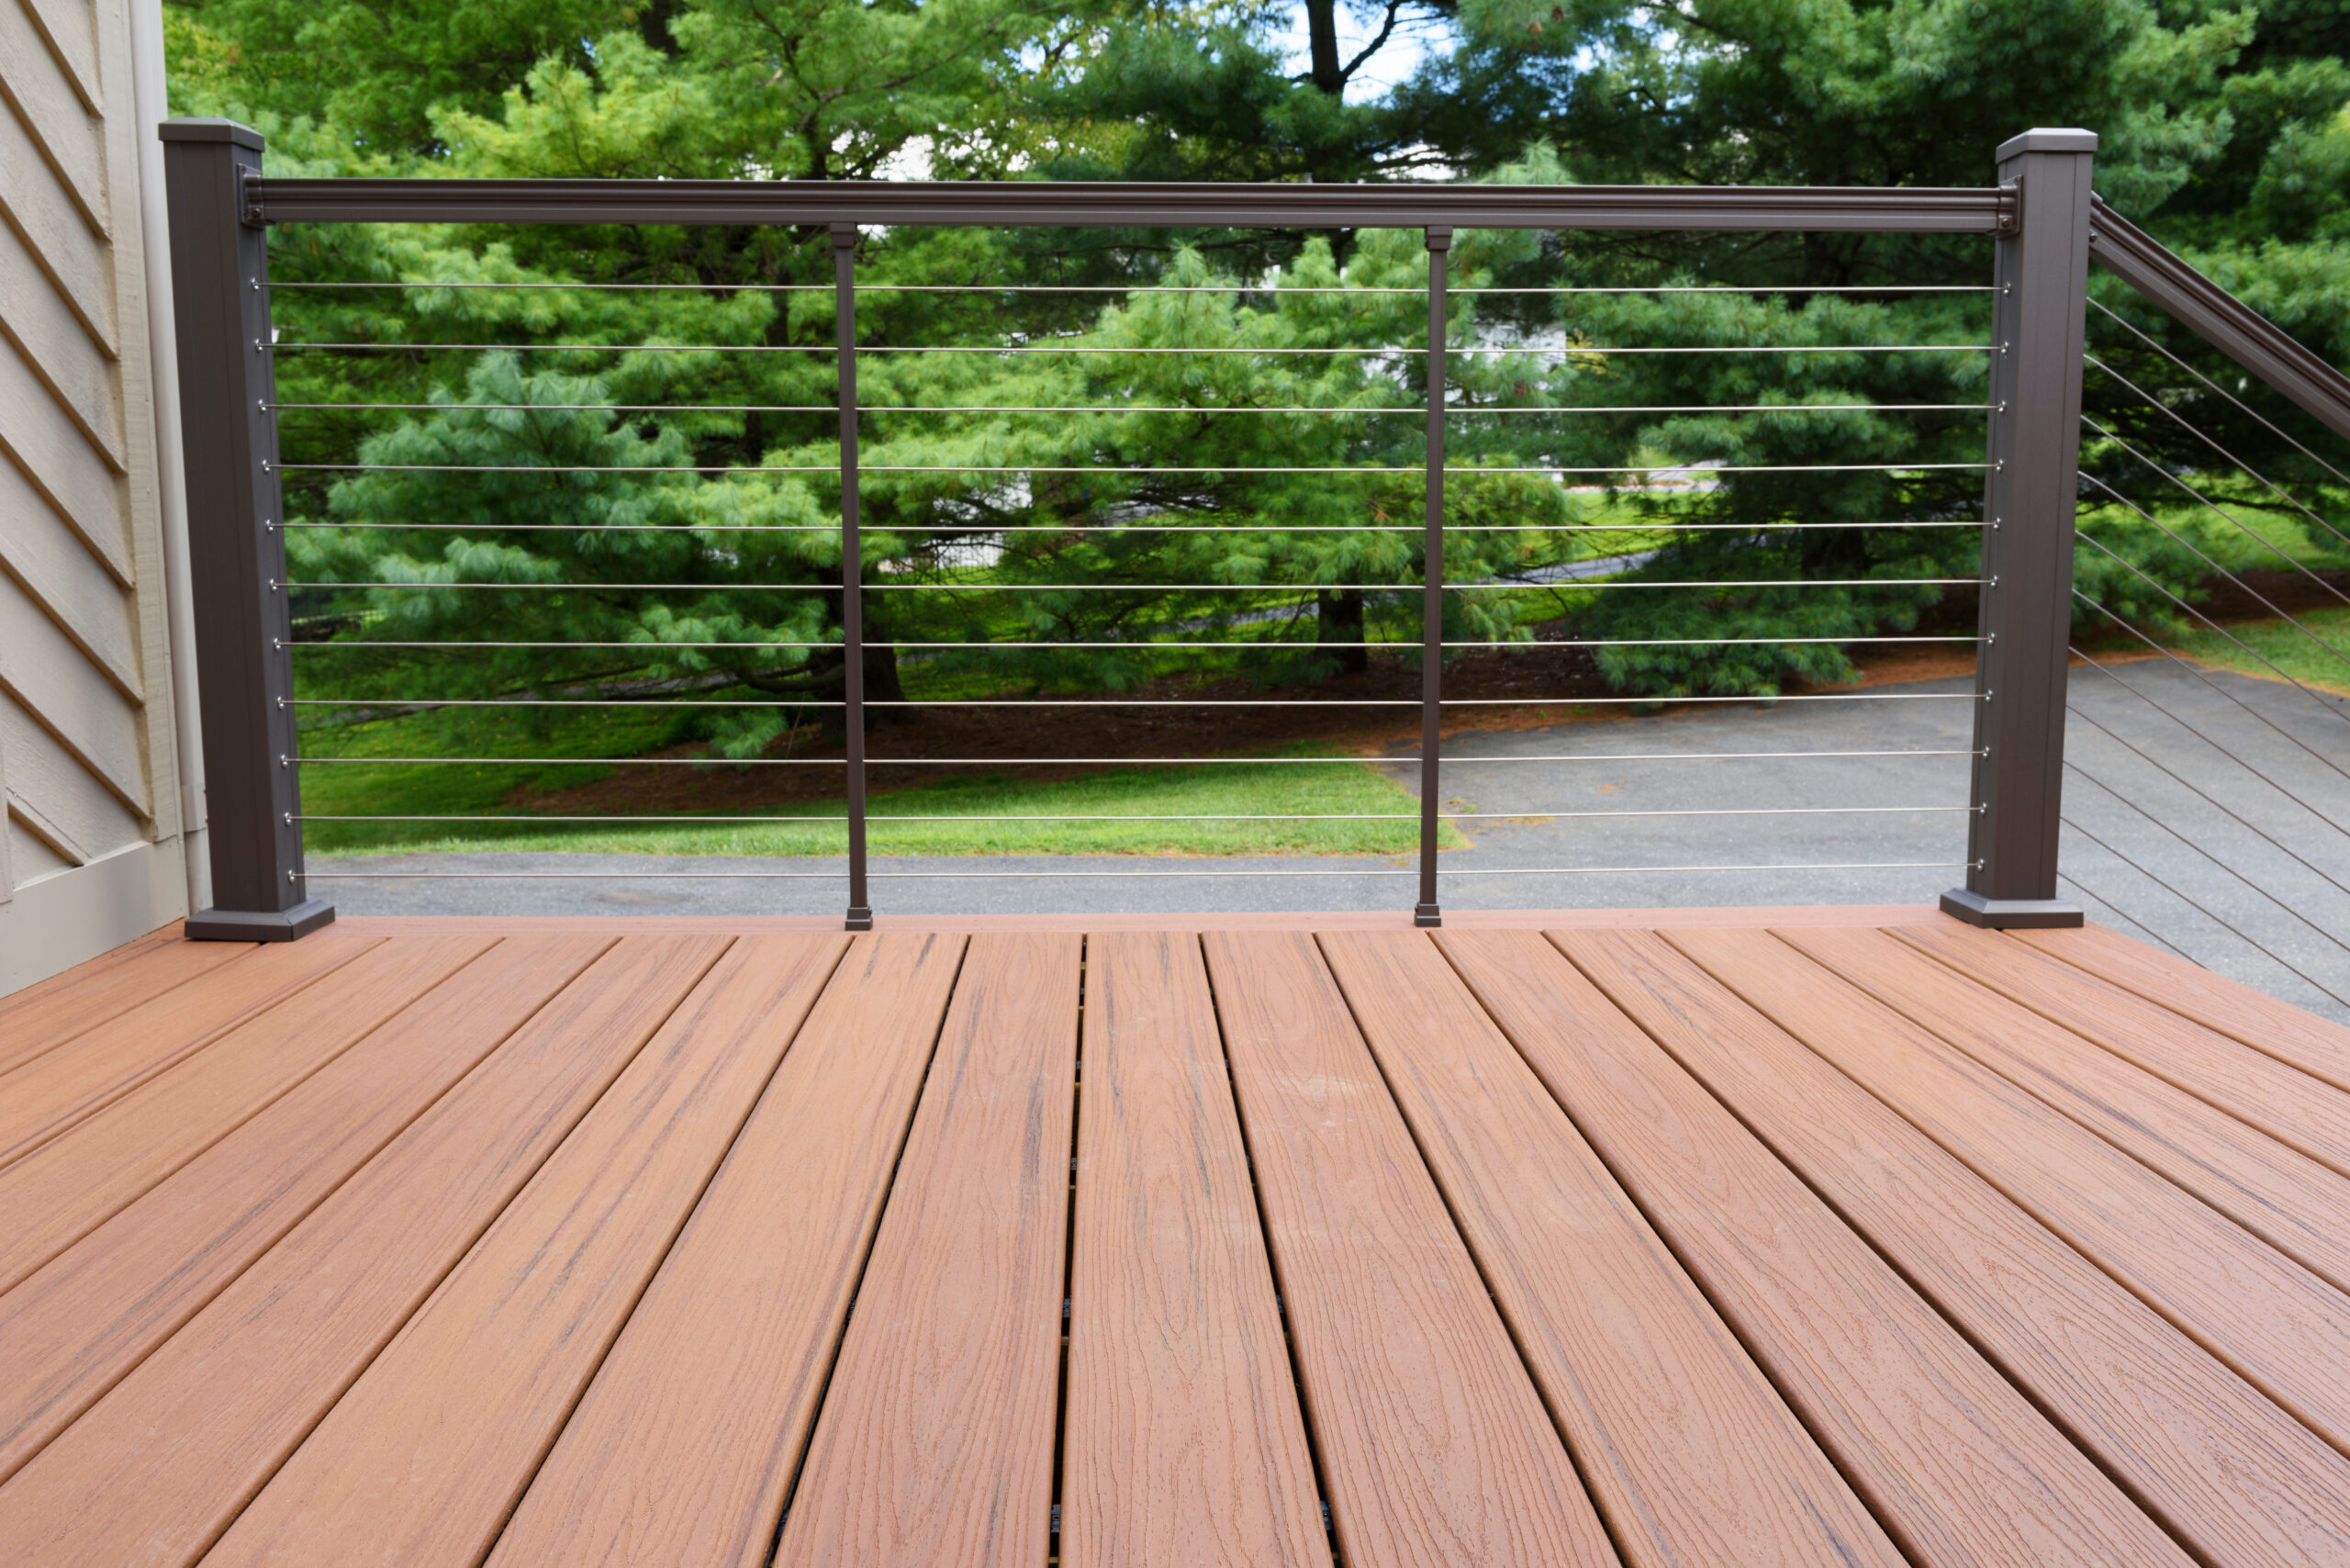 Trex decking with metal wire railings from a Deck Builder in Marlborough MA